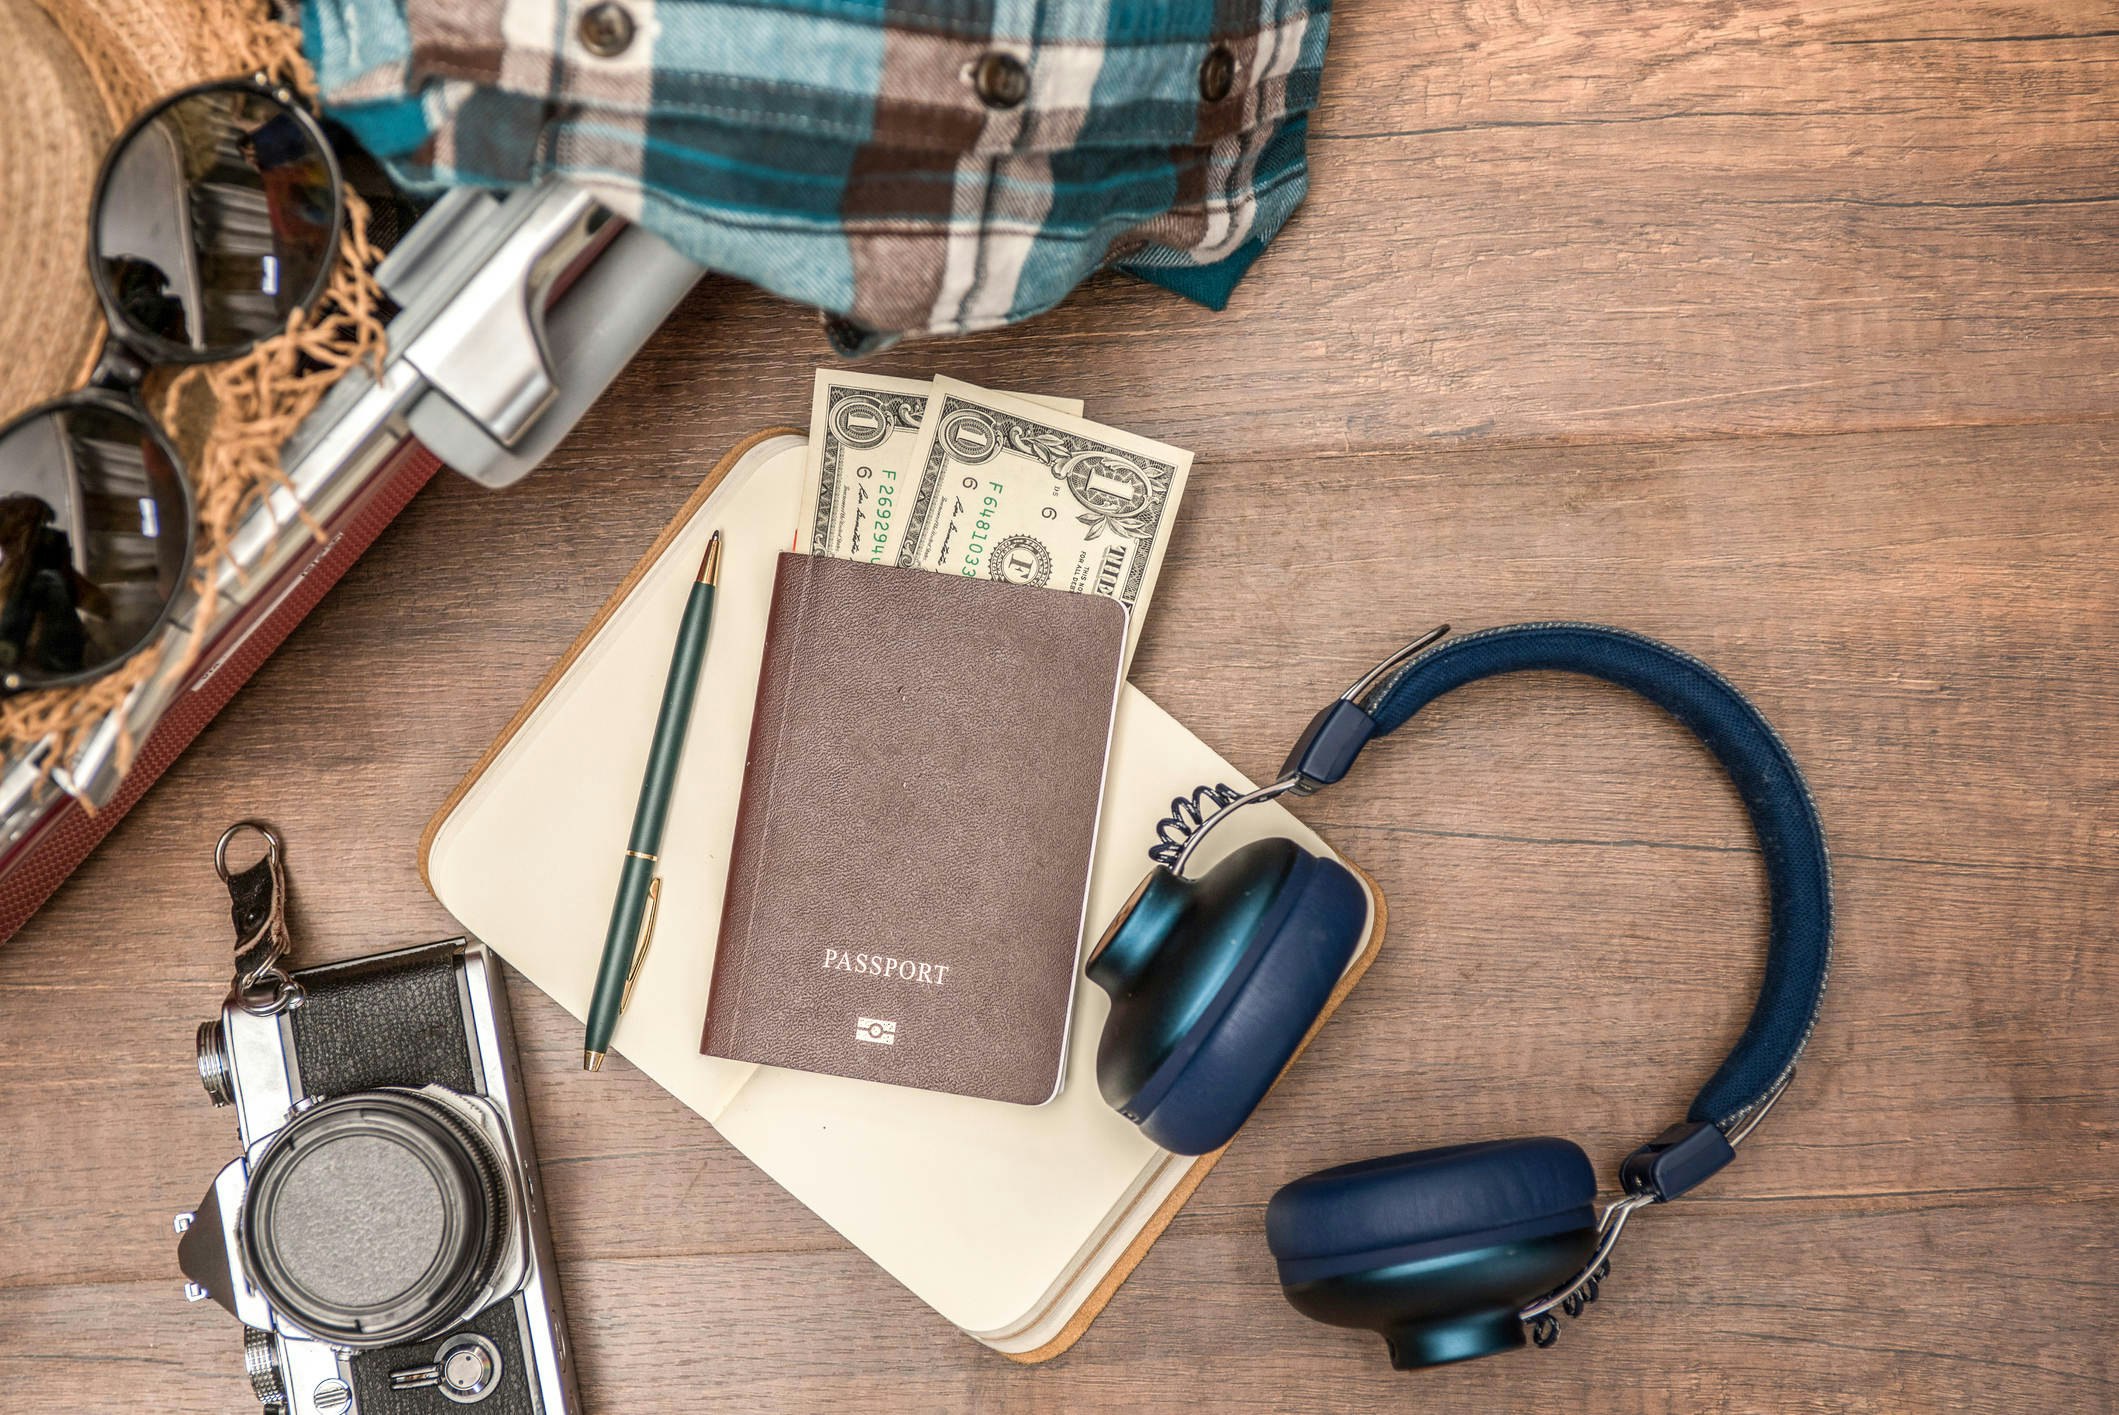 A table covered with items: a camera, passport with two US dollars sticking out, a notebook and a pen, sunglasses, and headphones